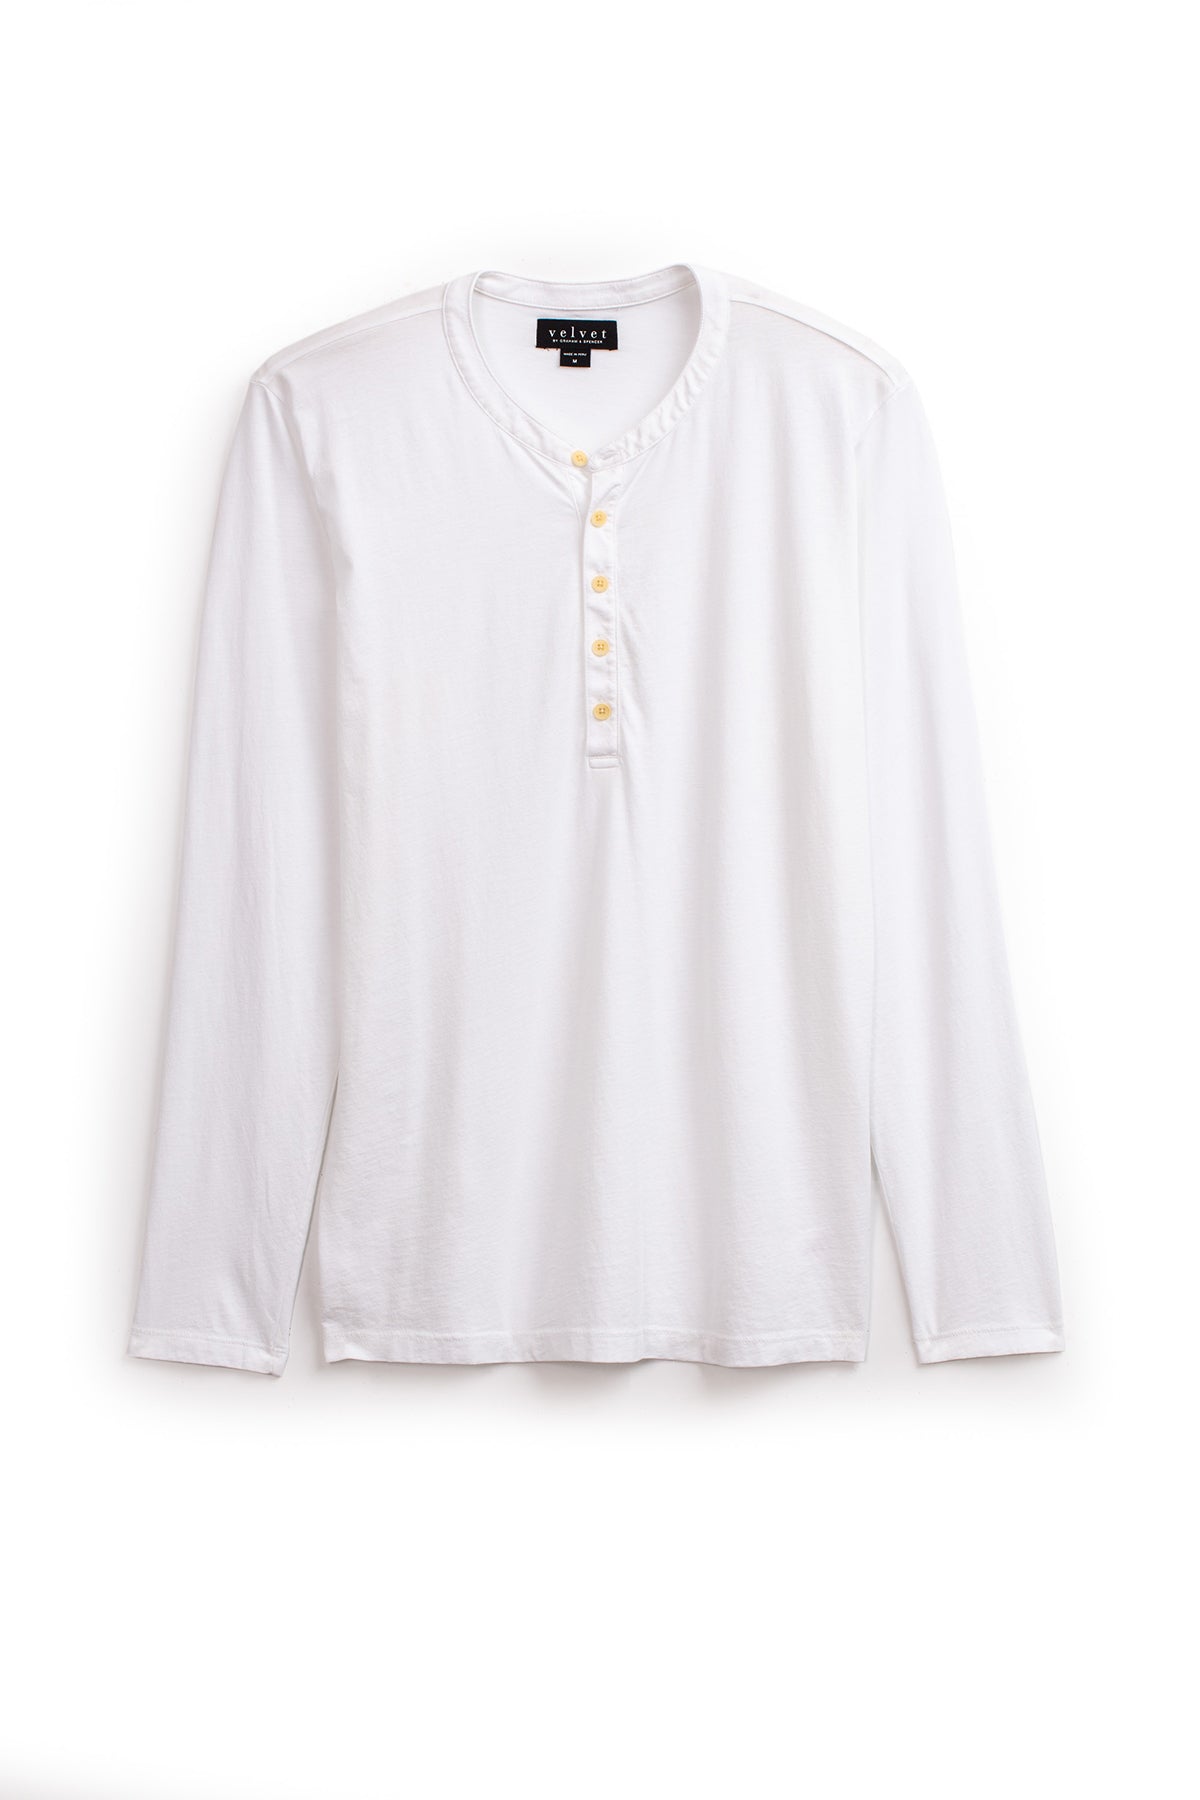 A lightweight, long-sleeve white ALVARO HENLEY by Velvet by Graham & Spencer with a round neckline and four buttons down the front, displayed against a plain white background.-20811086627009